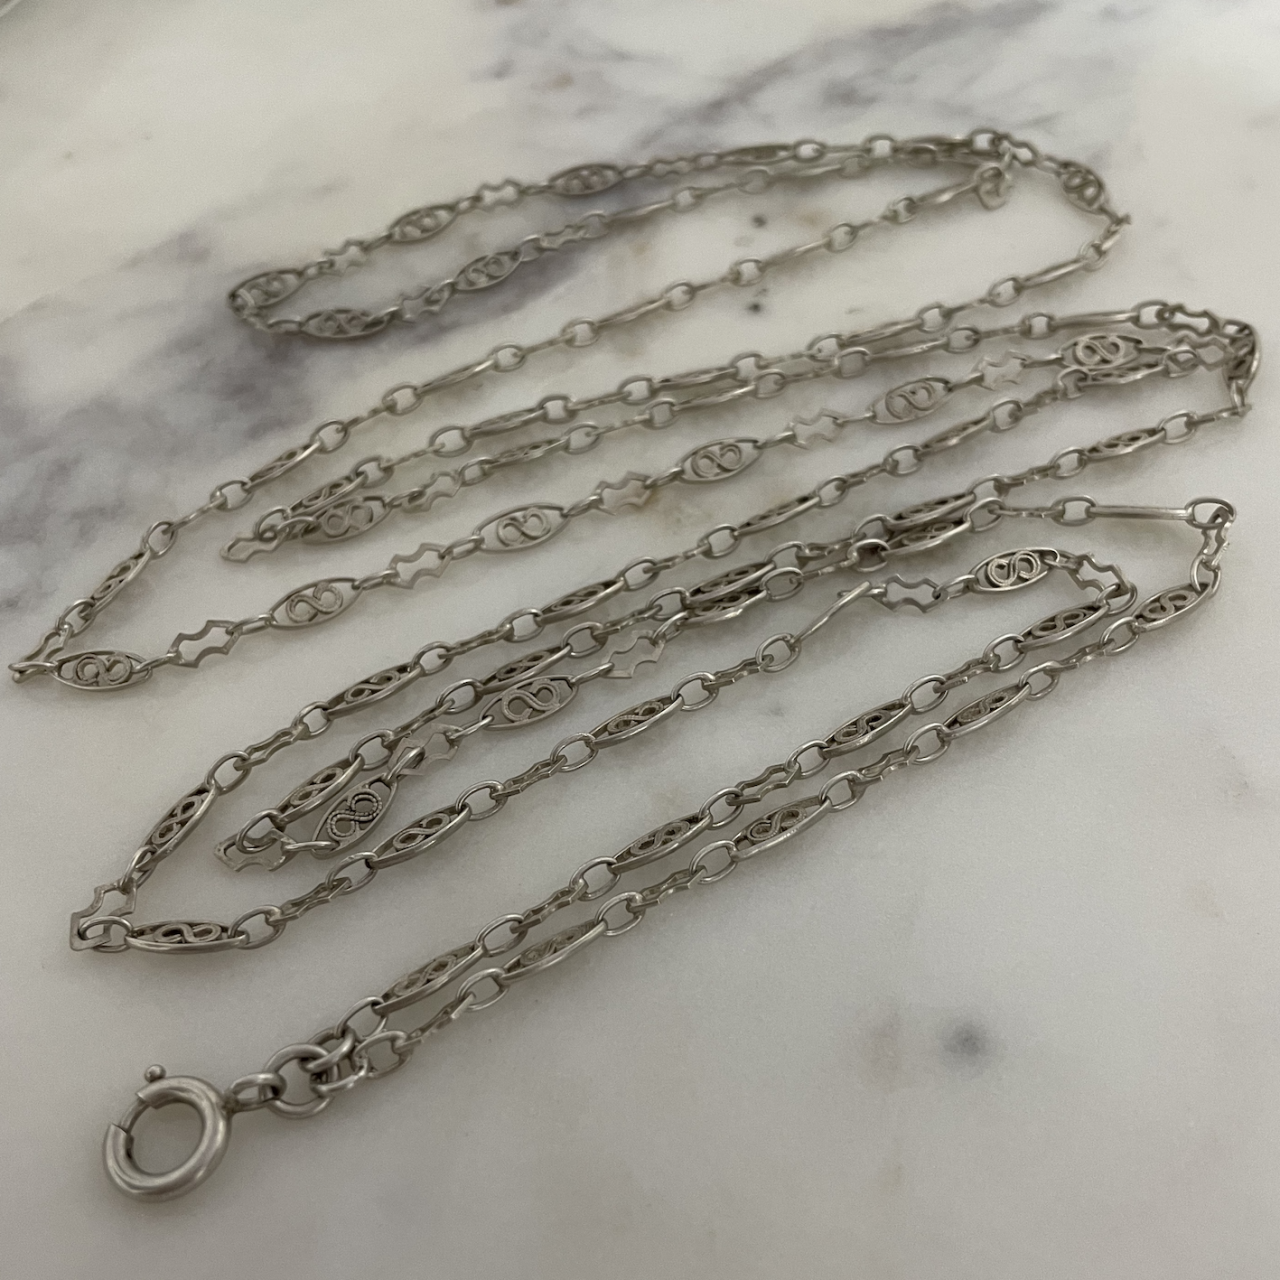 Antique French silver chain